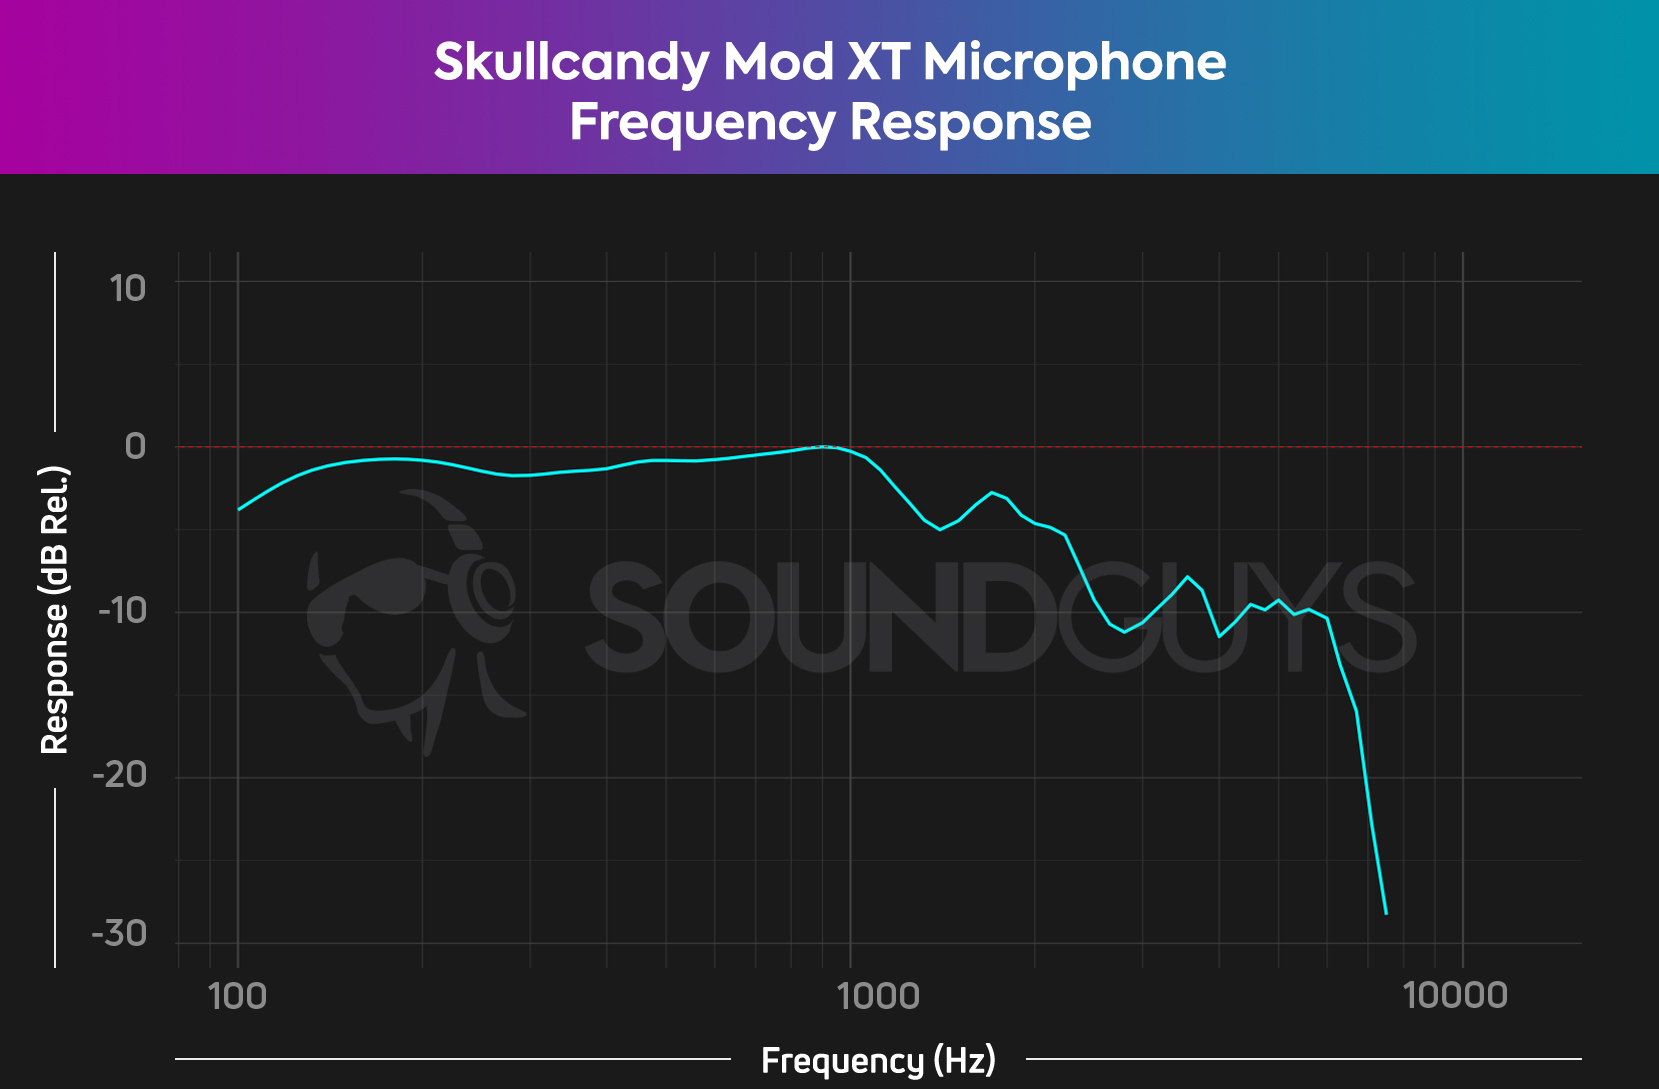 The microphone frequency response chart for the Skullcandy Mod XT.